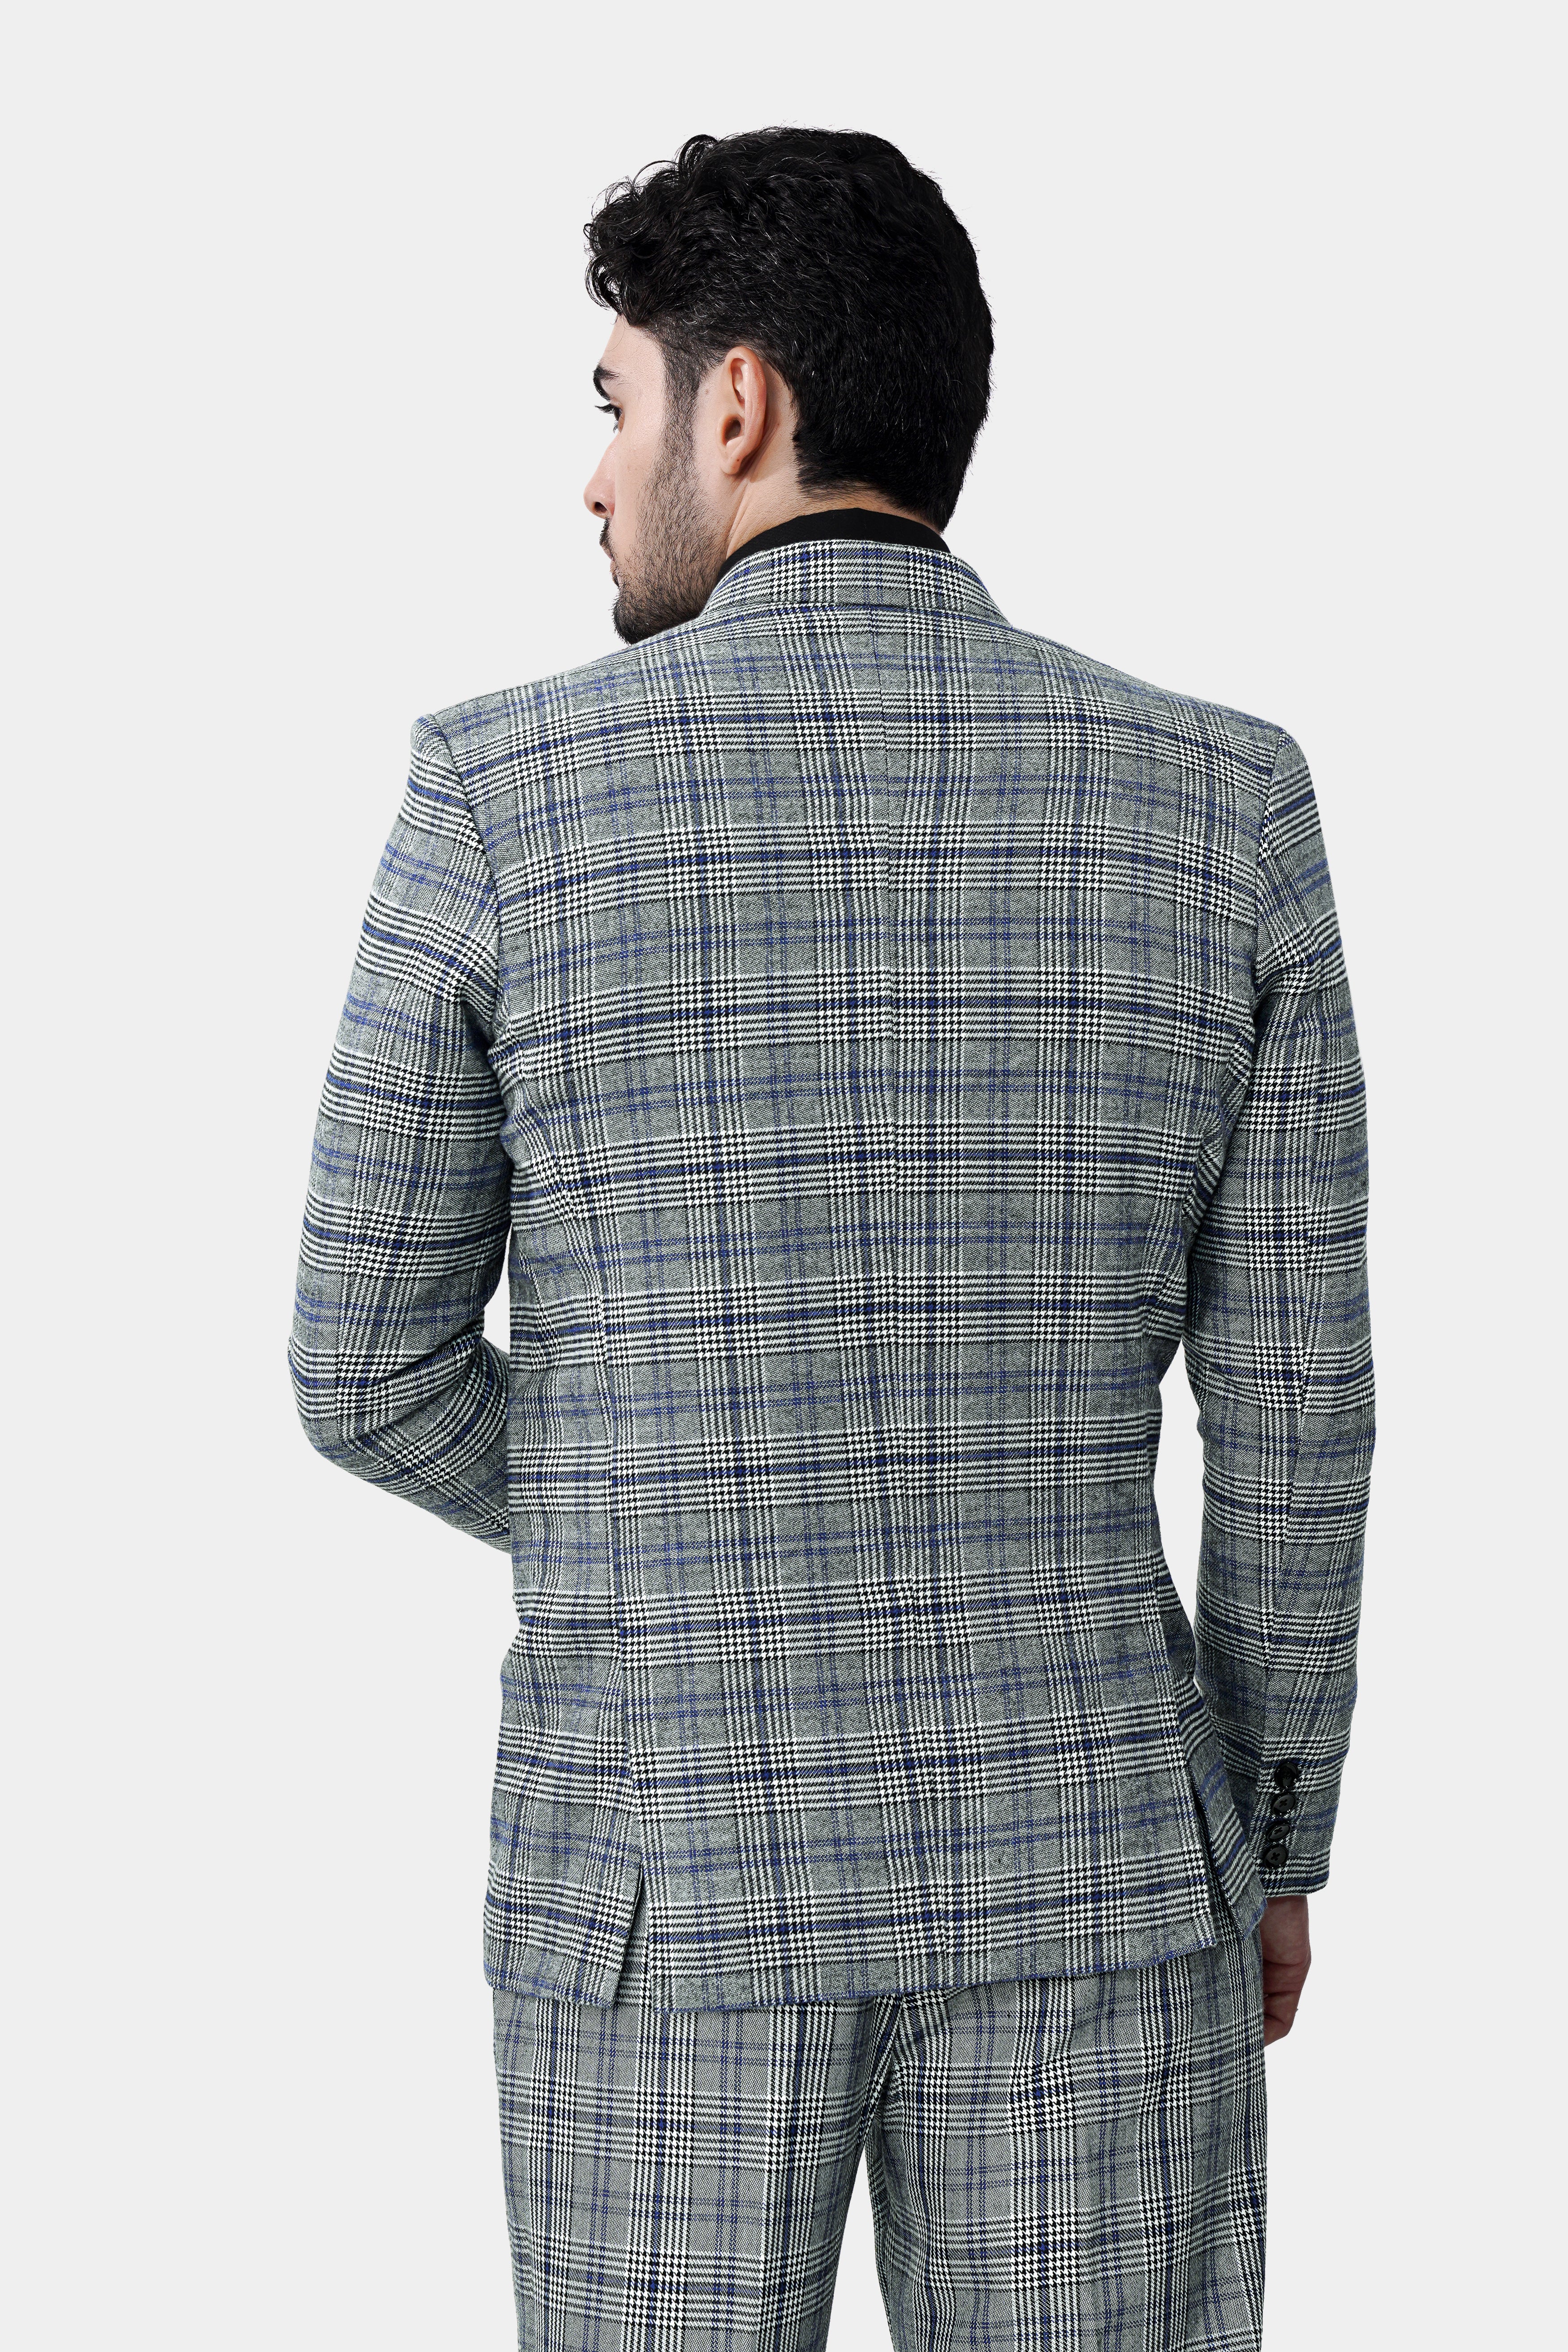 Chalice Gray and Chathams Blue Plaid Houndstooth Tweed Double-Breasted Blazer BL3027-DB-36, BL3027-DB-38, BL3027-DB-40, BL3027-DB-42, BL3027-DB-44, BL3027-DB-46, BL3027-DB-48, BL3027-DB-50, BL3027-DB-52, BL3027-DB-54, BL3027-DB-56, BL3027-DB-58, BL3027-DB-60